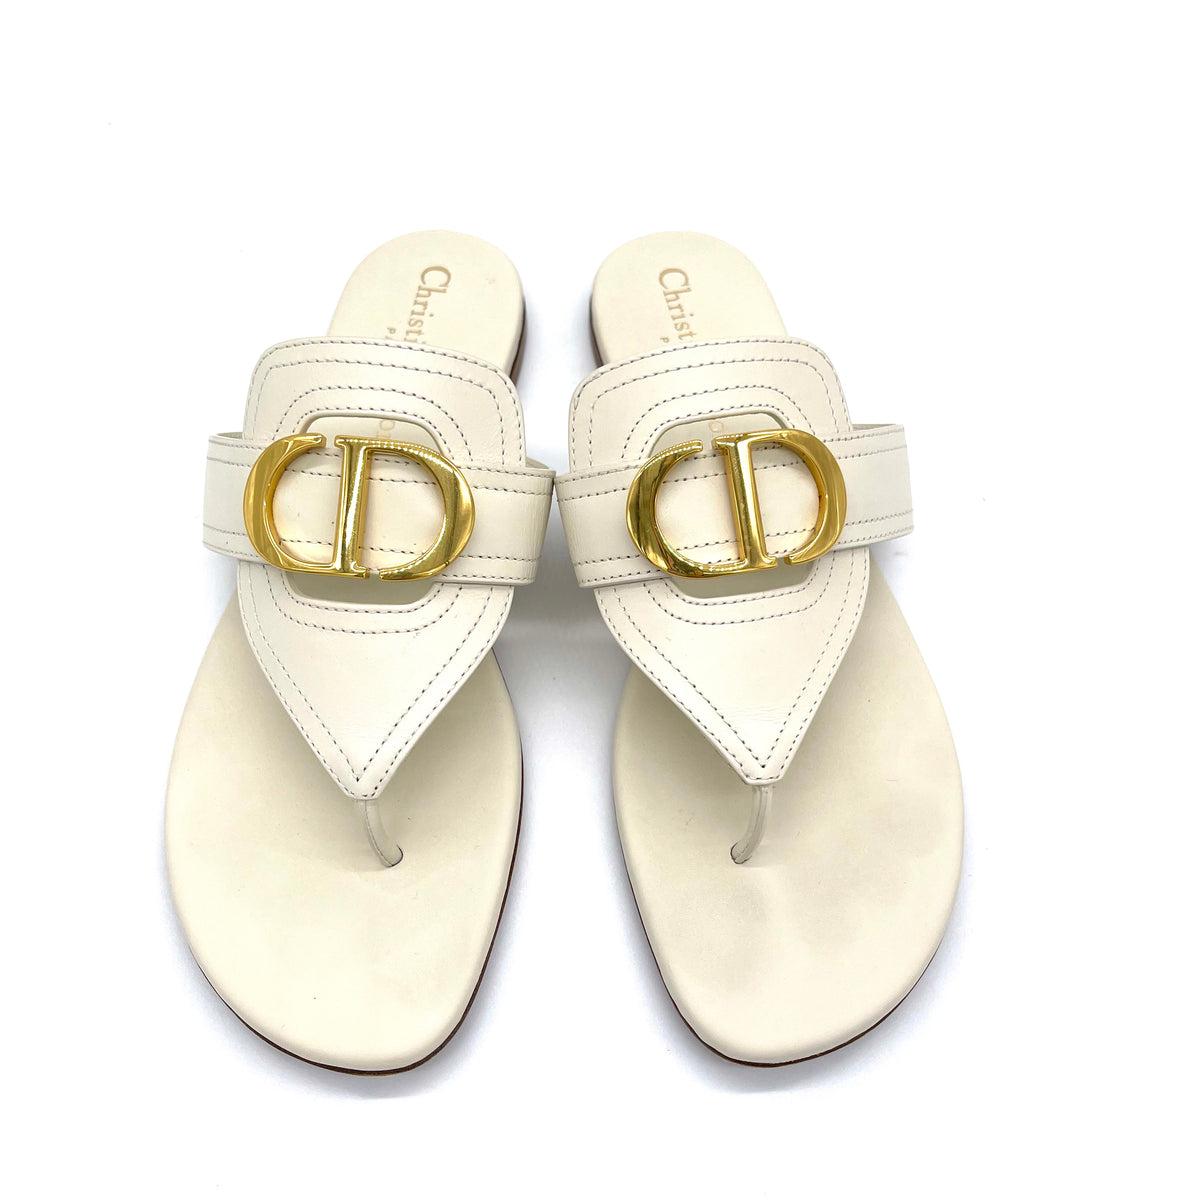 DIOR 30 MONTAIGNE Leather Thong Flat Sandals Slides Shoes Cream White Size 37